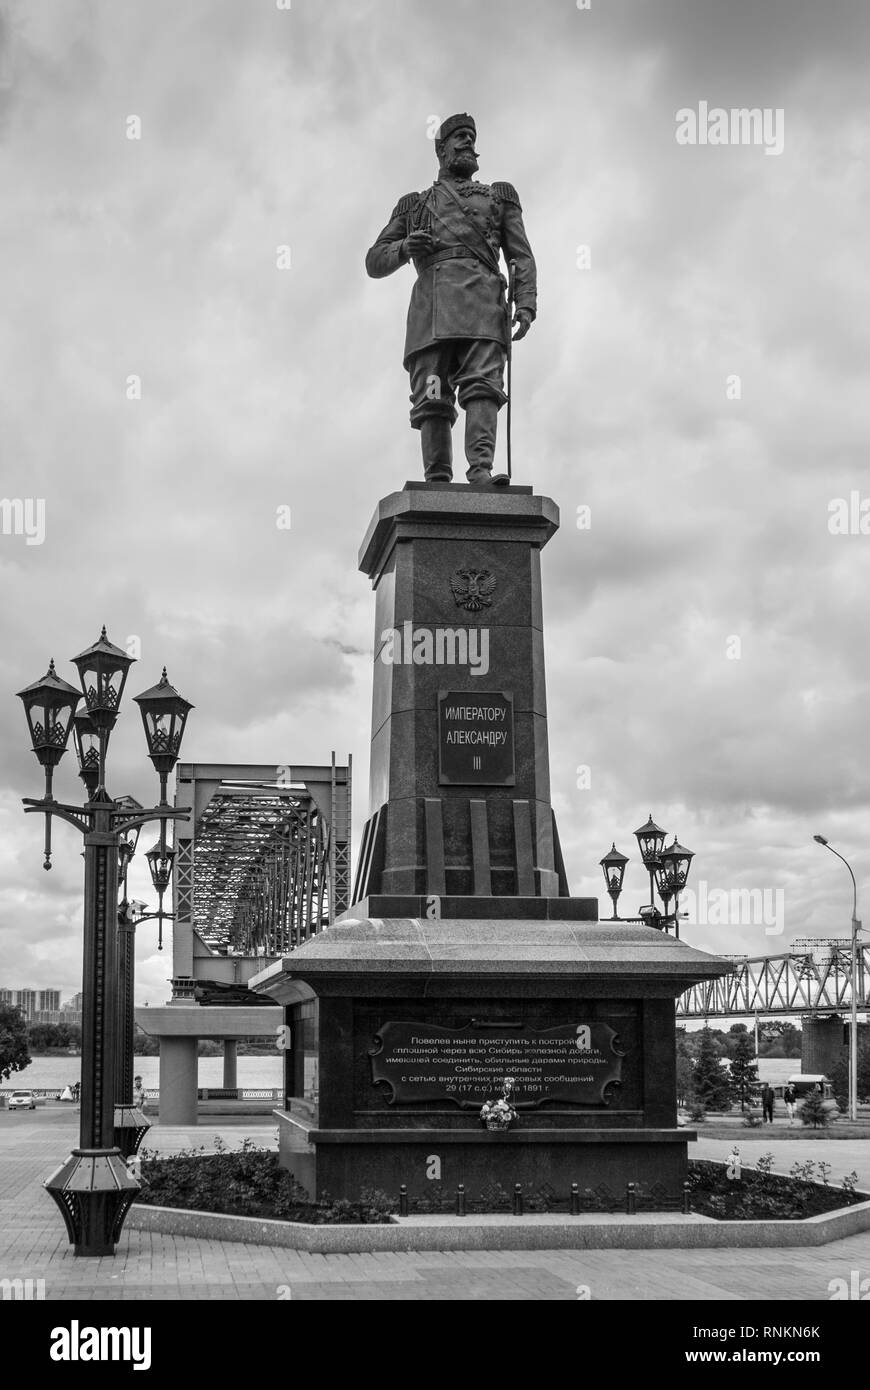 Novosibirsk, Russia - June 28, 2013: the Monument to Russian Emperor Alexander III on the embankment of the river Ob. Black and white photography. Stock Photo